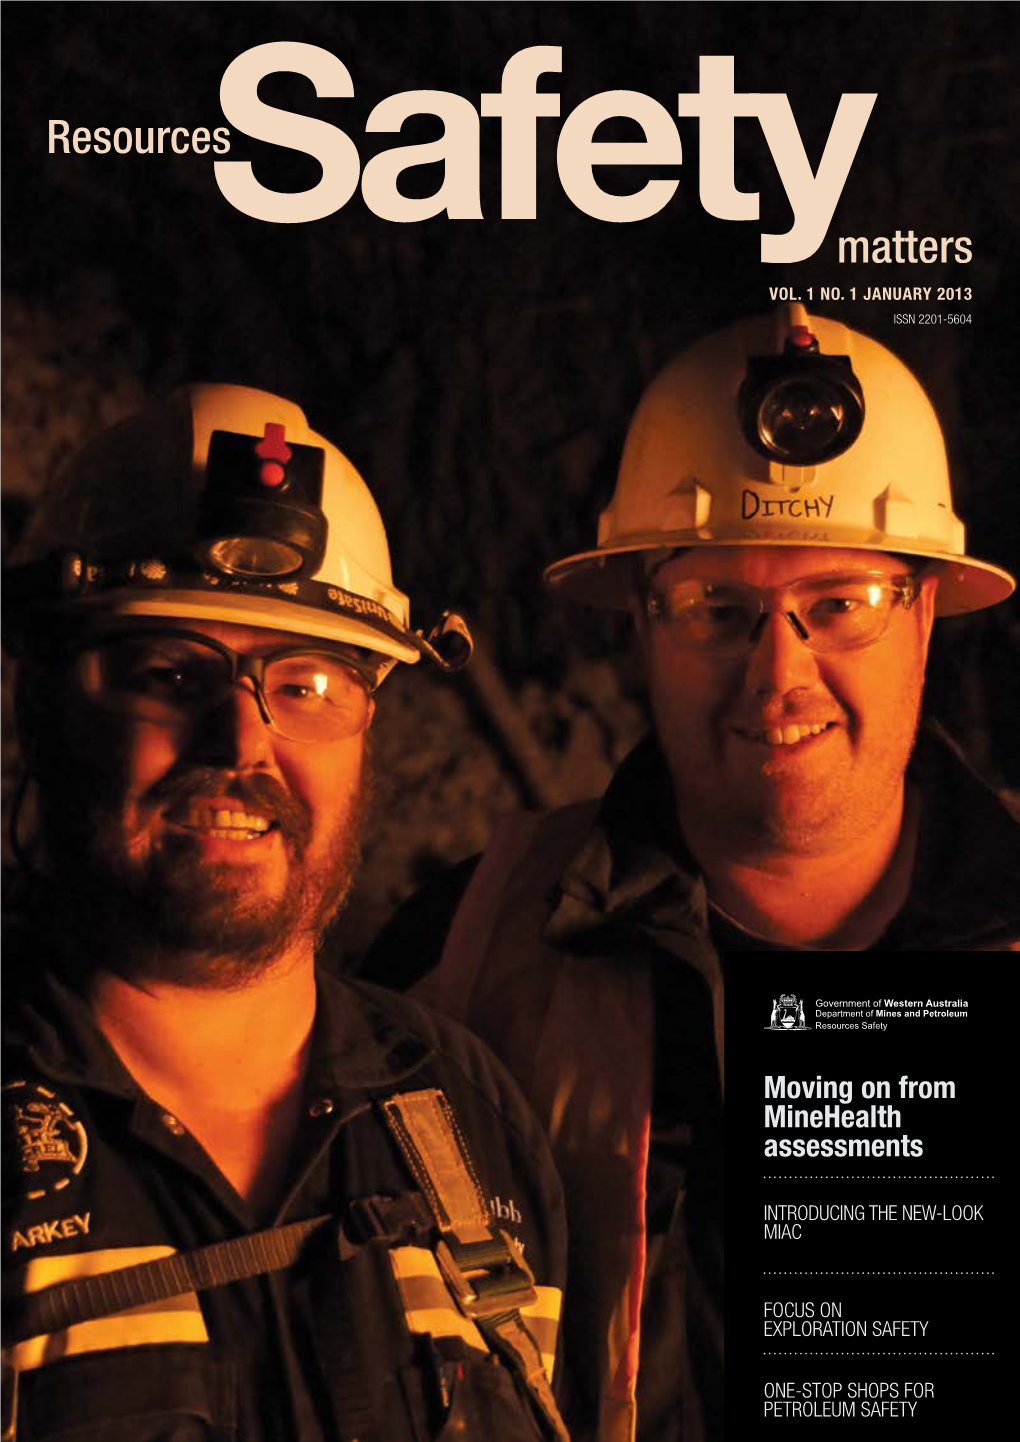 Resources Safety Matters January 2013